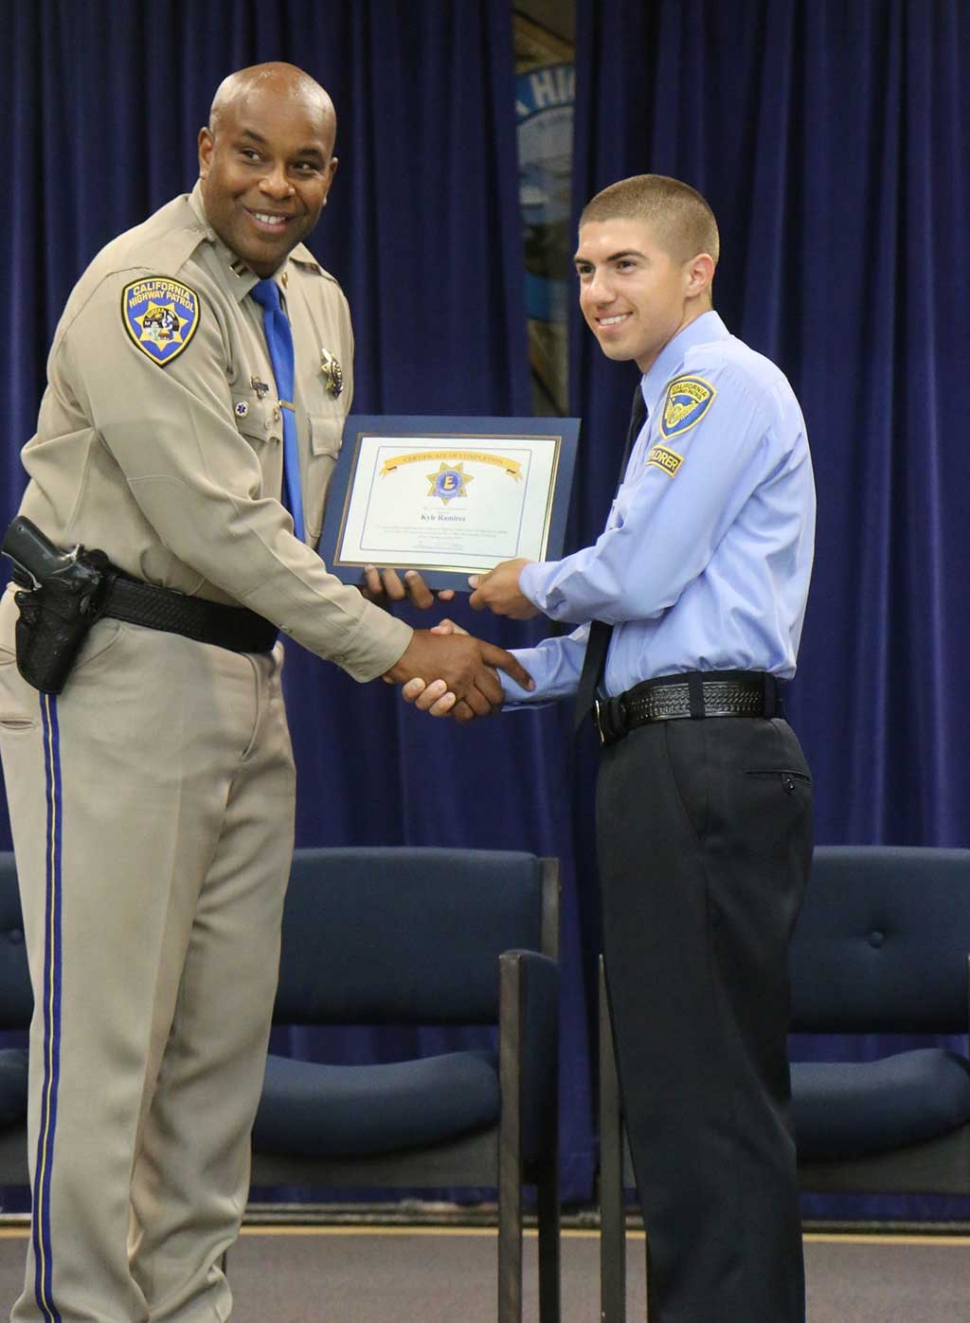 Kyle Ramirez is a local 17 year old, soon to be Senior of Fillmore High School. In his free time he has joined the California Highway Patrol Cadet/Explorer program located at the Moorpark station. The California Highway Patrol’s Explorer Program is for young men and women, 15
to 21 years of age, allowing them to develop the skills and knowledge needed to serve the people through discipline and commitment. Explorers are able to assist the CHP both in office and out in the field but also participate in physical fitness training, medical training, organizational, and clerical training. Kyle was able to attend a week long academy at the CHP training facility located in Sacramento. There he joined 43 other explorers that came from all over California. Kyle and the other explores went through a hell week where they were all put through extensive classroom training and physical fitness challenges to push their limits. The program is a crash course of the real life academy setting and holds them all to the same standards. All 44 explores graduated the 6 day program and preformed all physical and mental tests required of them. At the end of the program Kyle received a badge and a completion certificate and is allowed to return for level four at 19 if he chooses to continue in this program. Photo courtesy of Sebastian Ramirez.